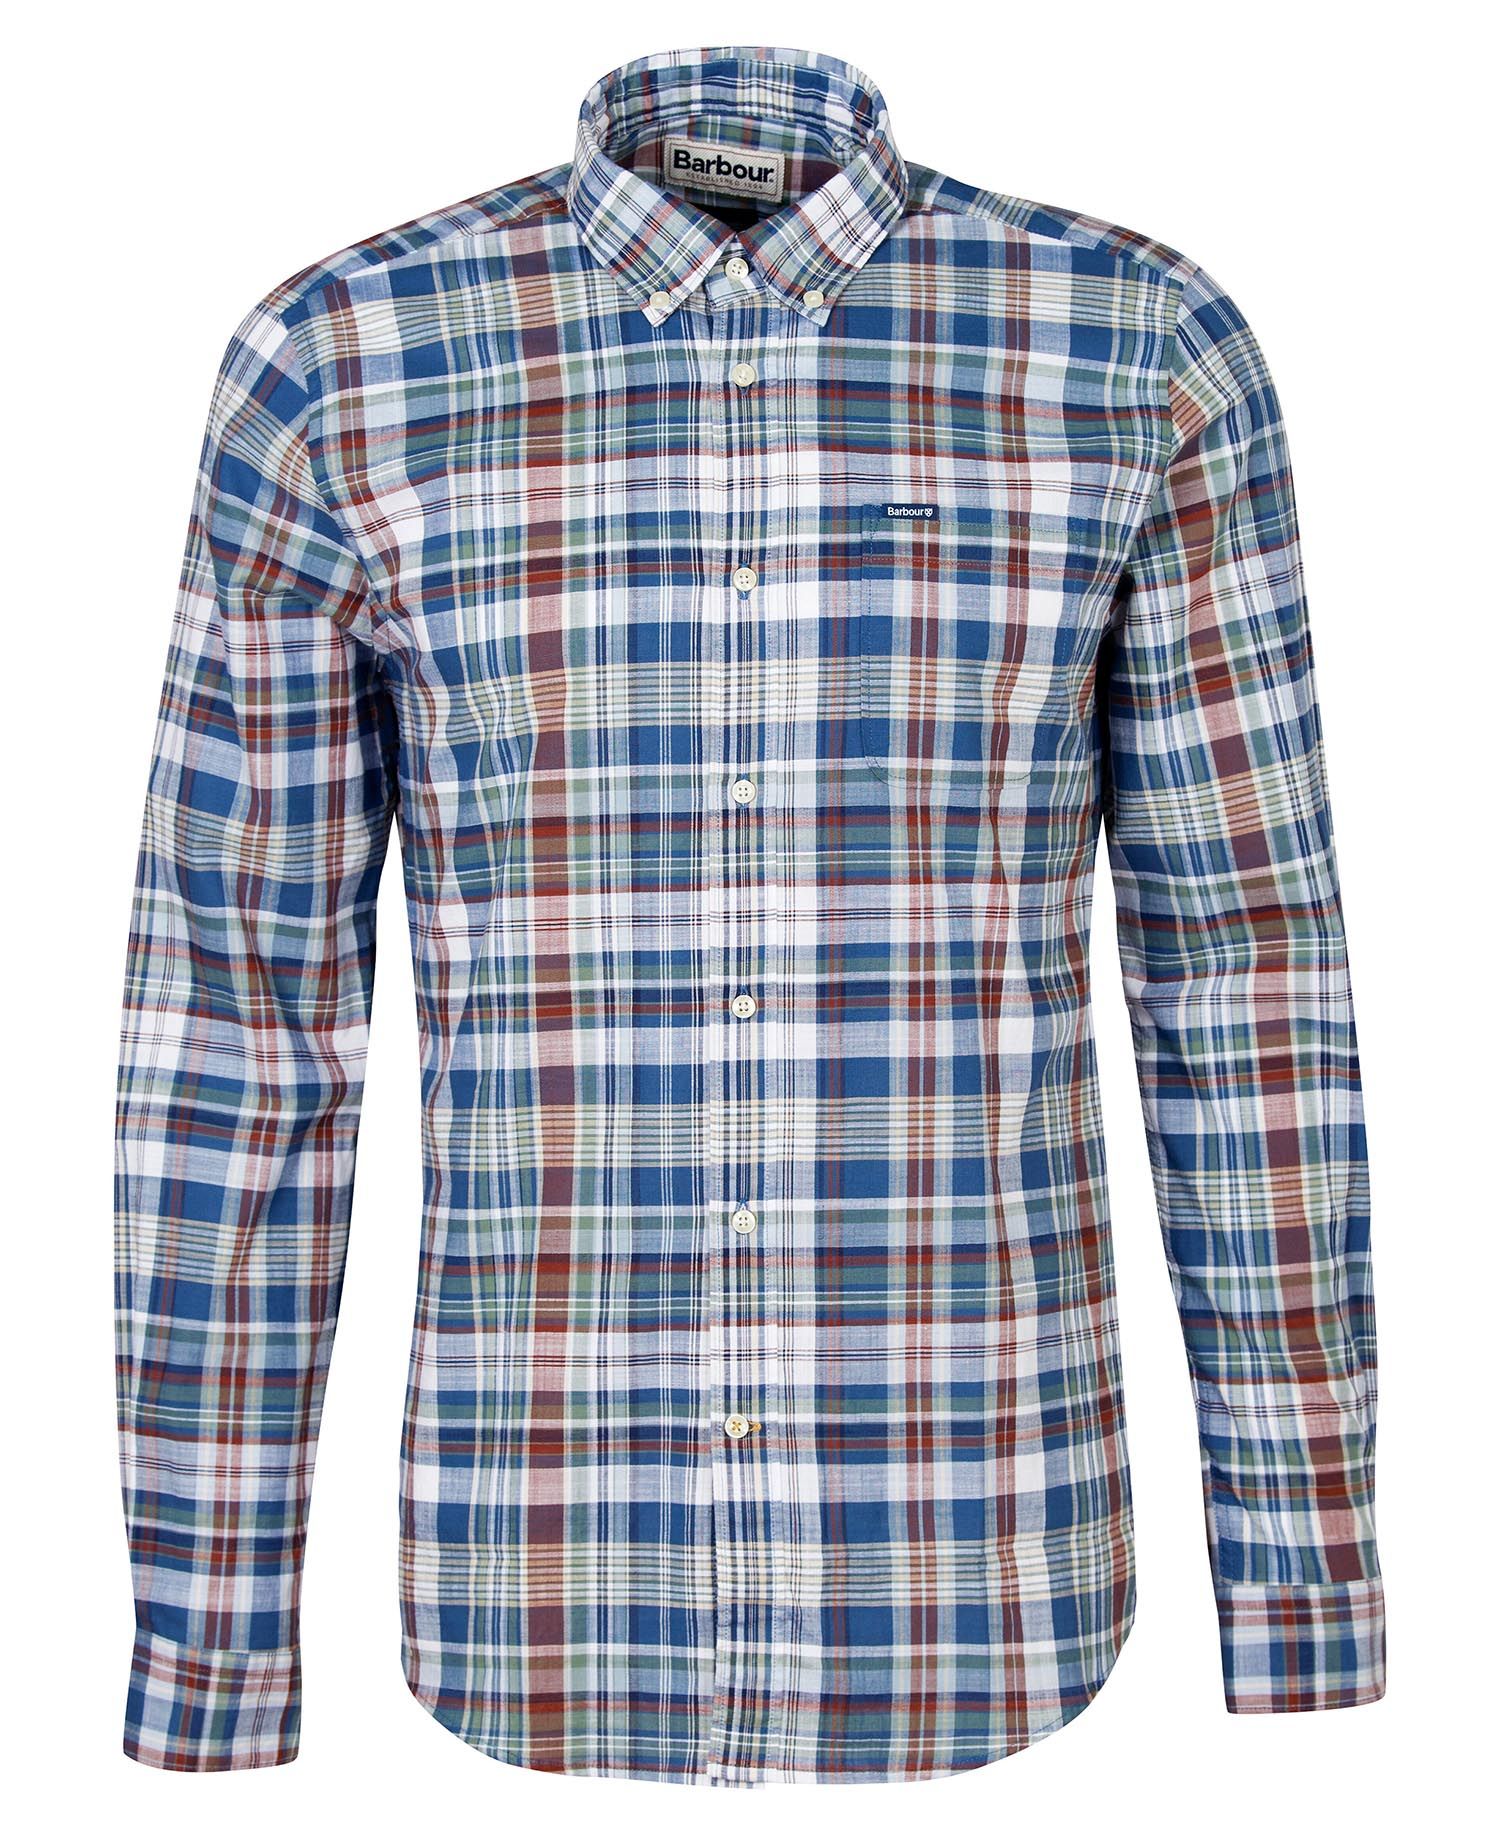 Barbour Seacove Tailored Shirt